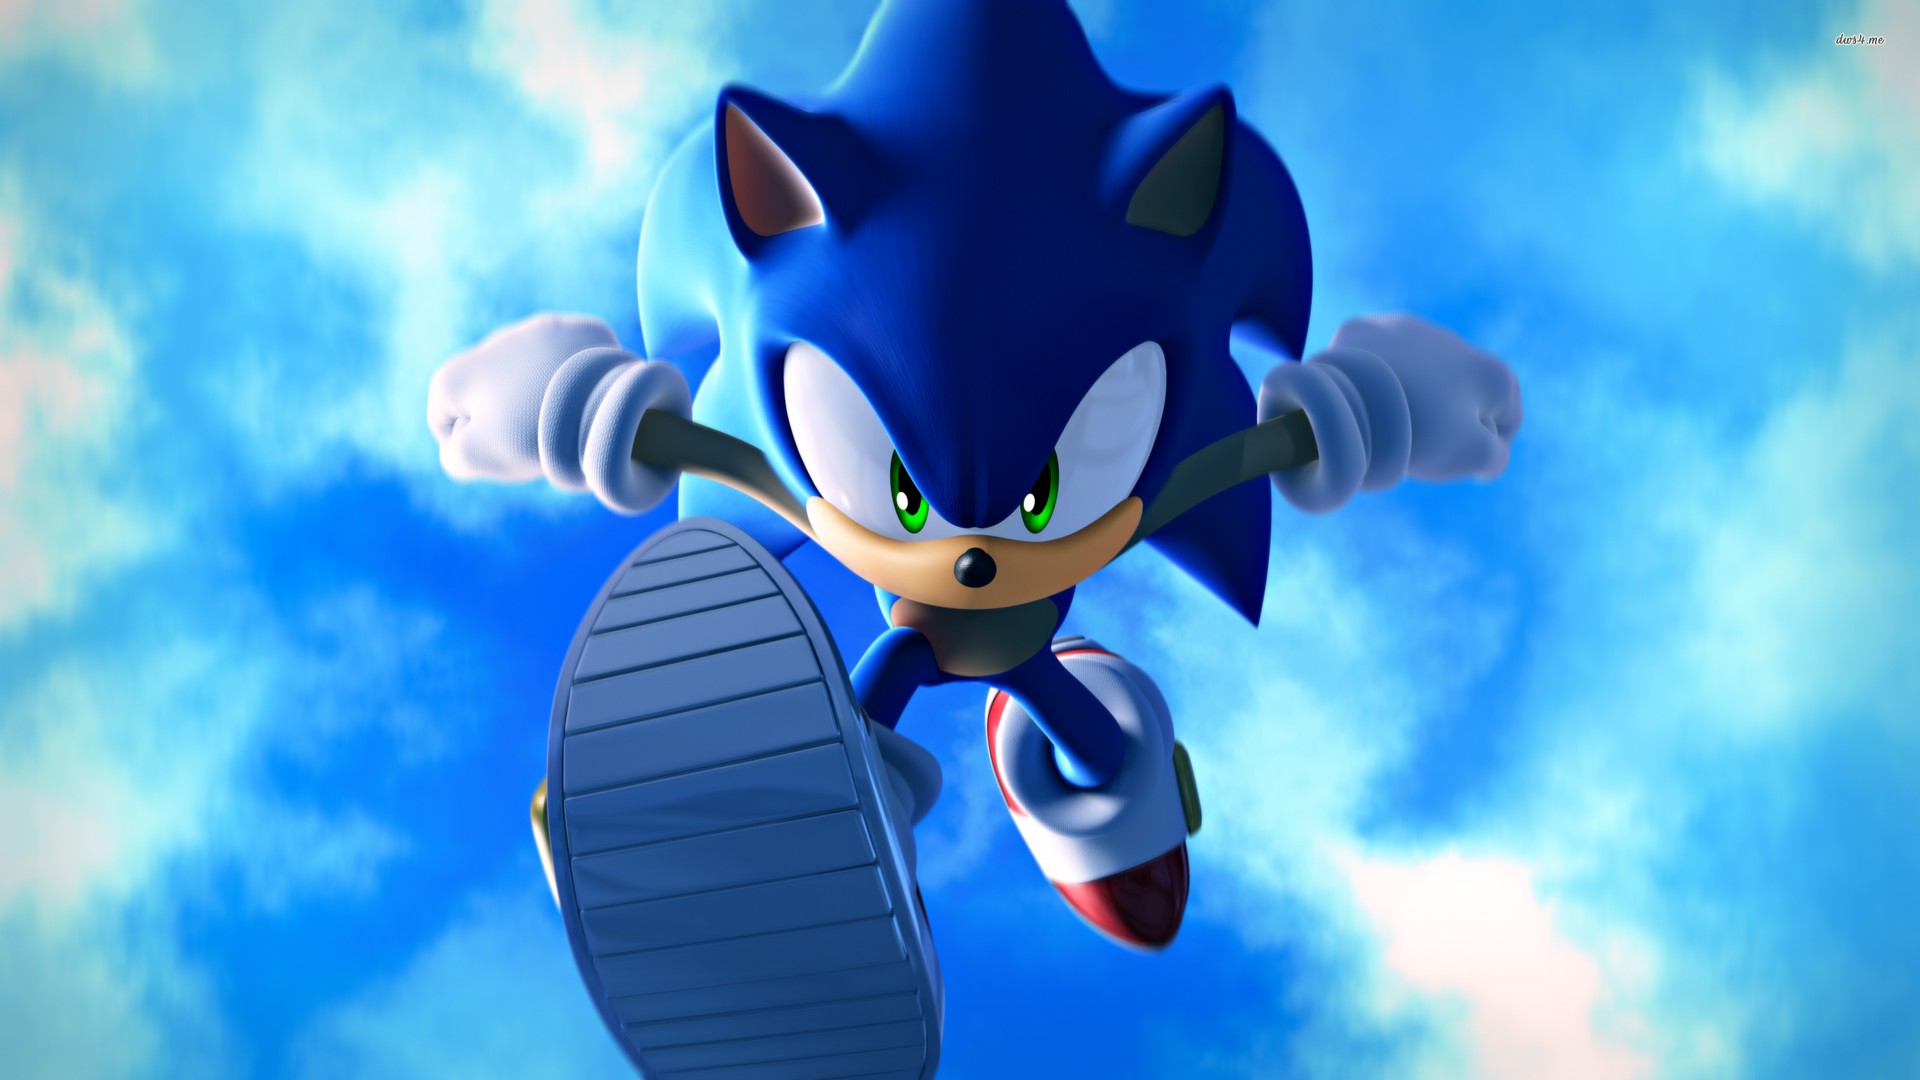 Sonic The Hedgehog Wallpaper With High-resolution Pixel - Sonic Wallpaper 4k - HD Wallpaper 